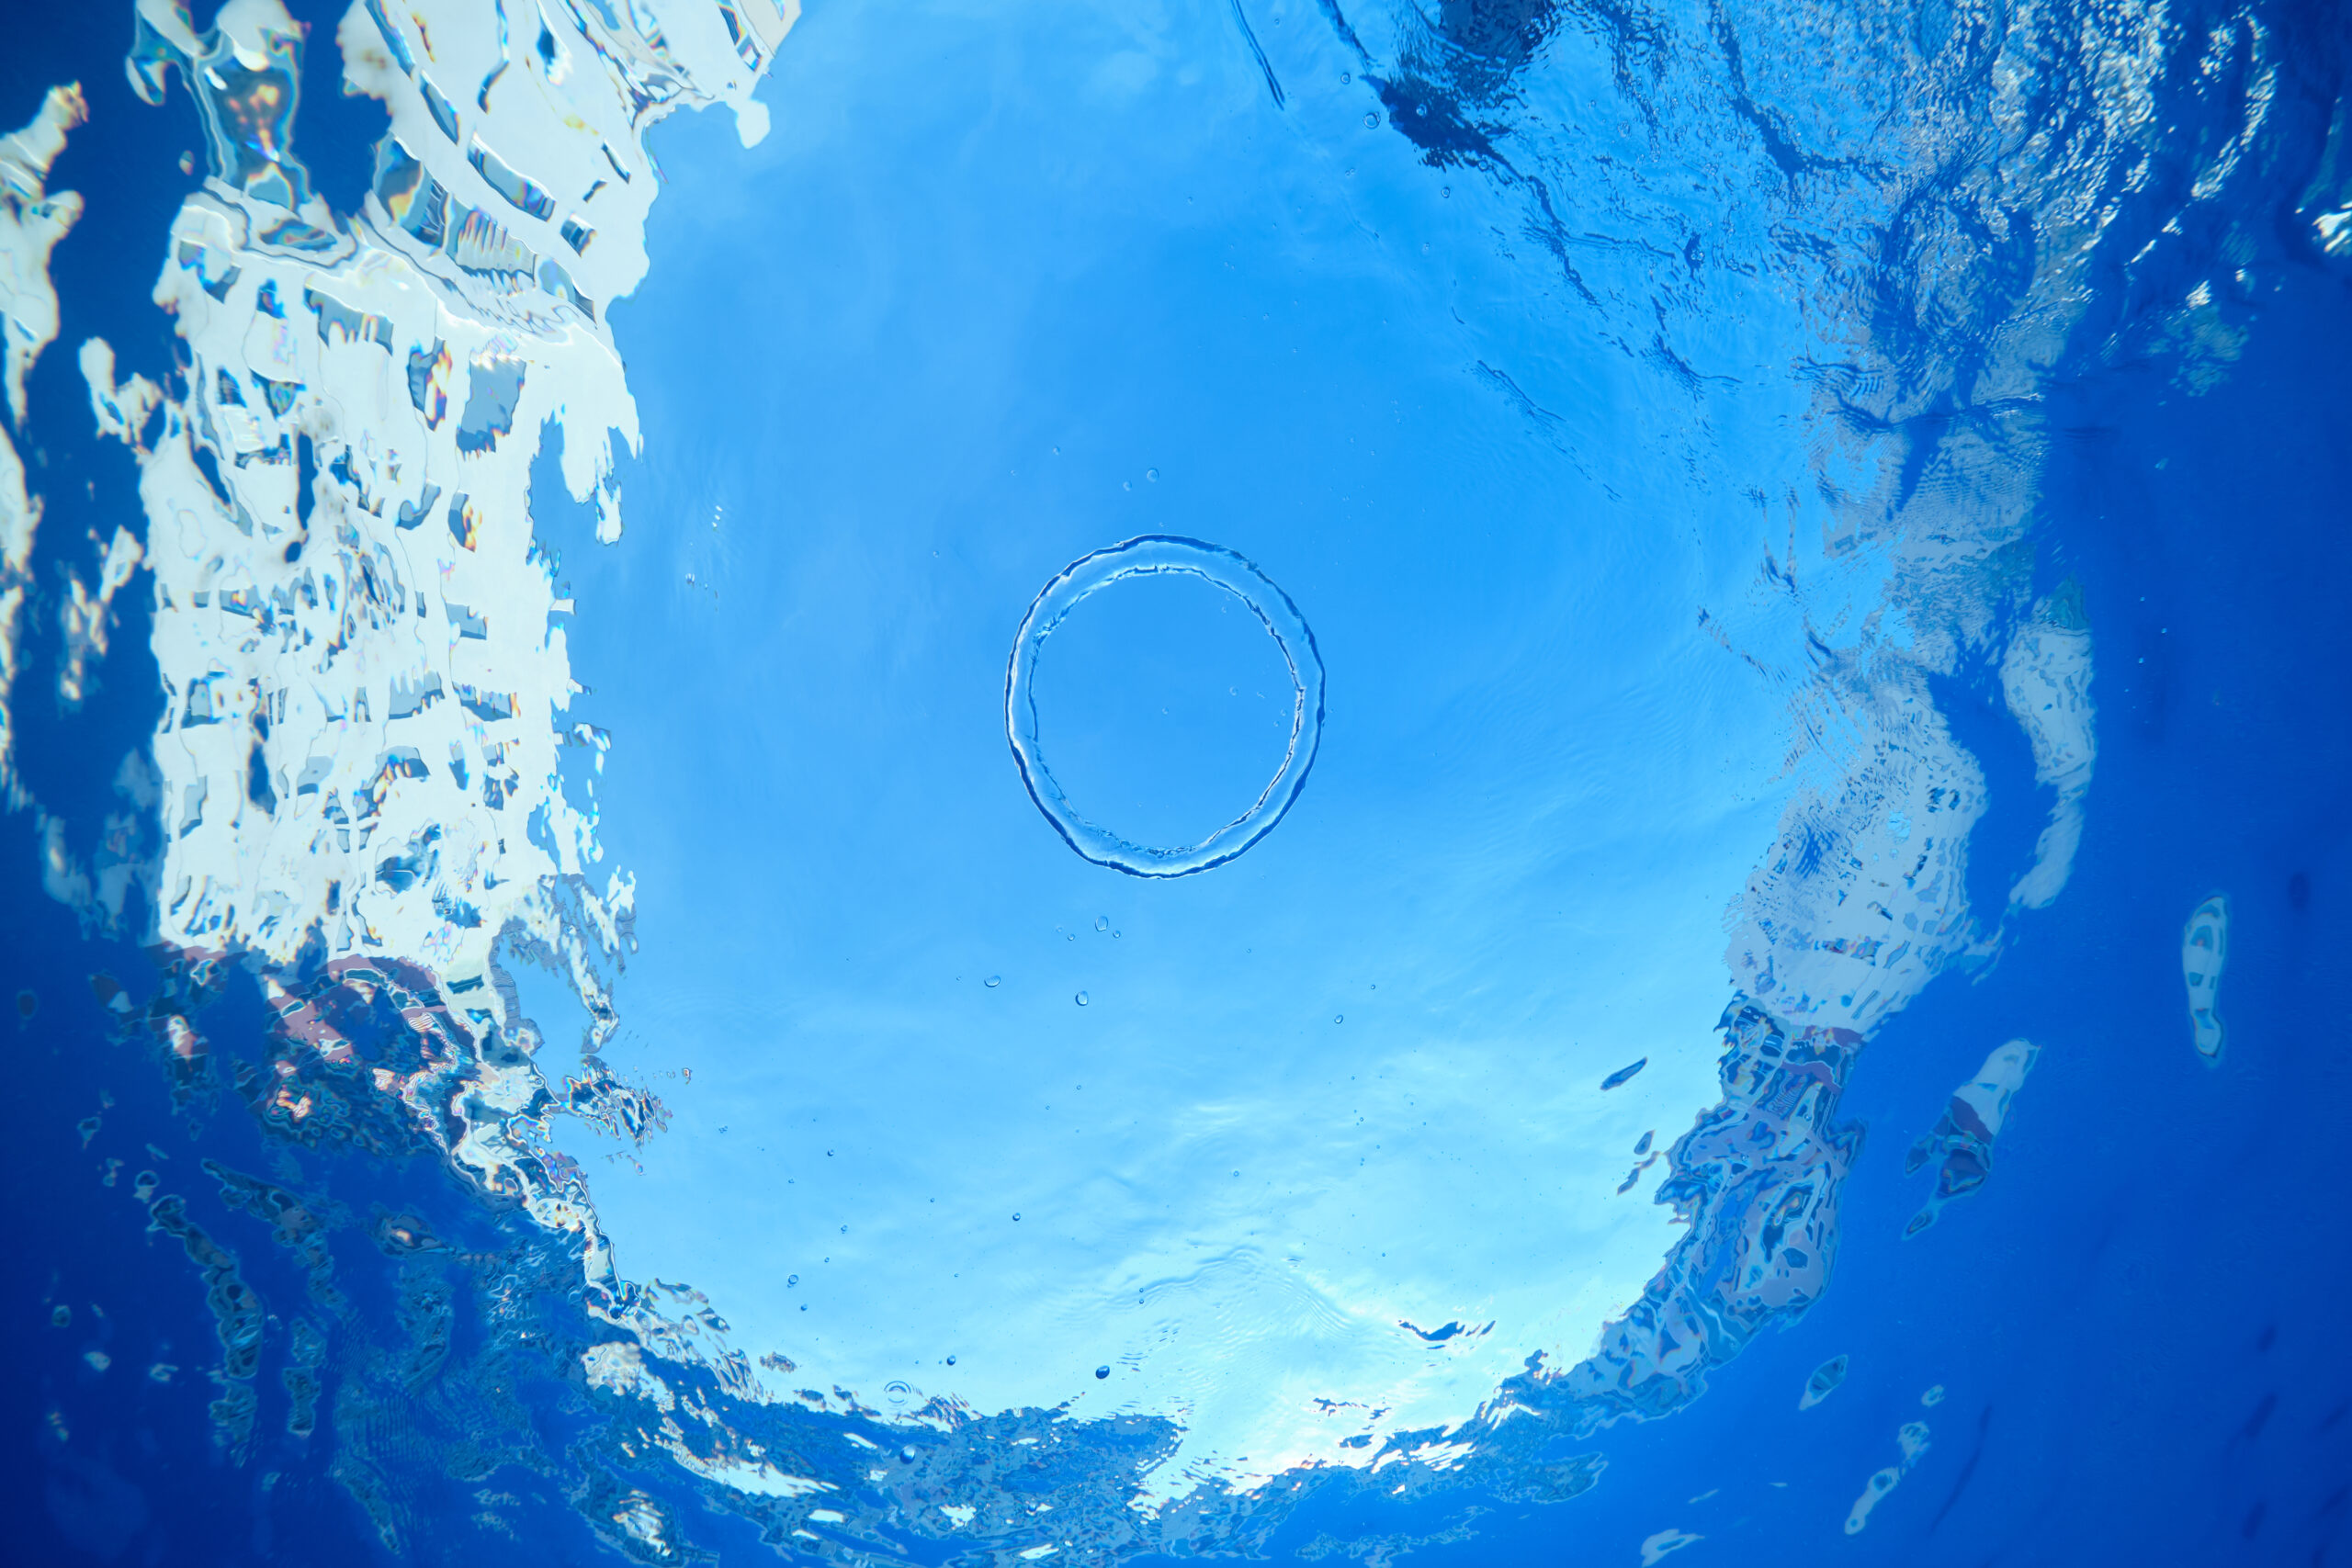 blue clear water with air ring 2022 01 28 10 42 49 utc scaled This Is What 2030 Could Look Like if We Win the War on Climate Change